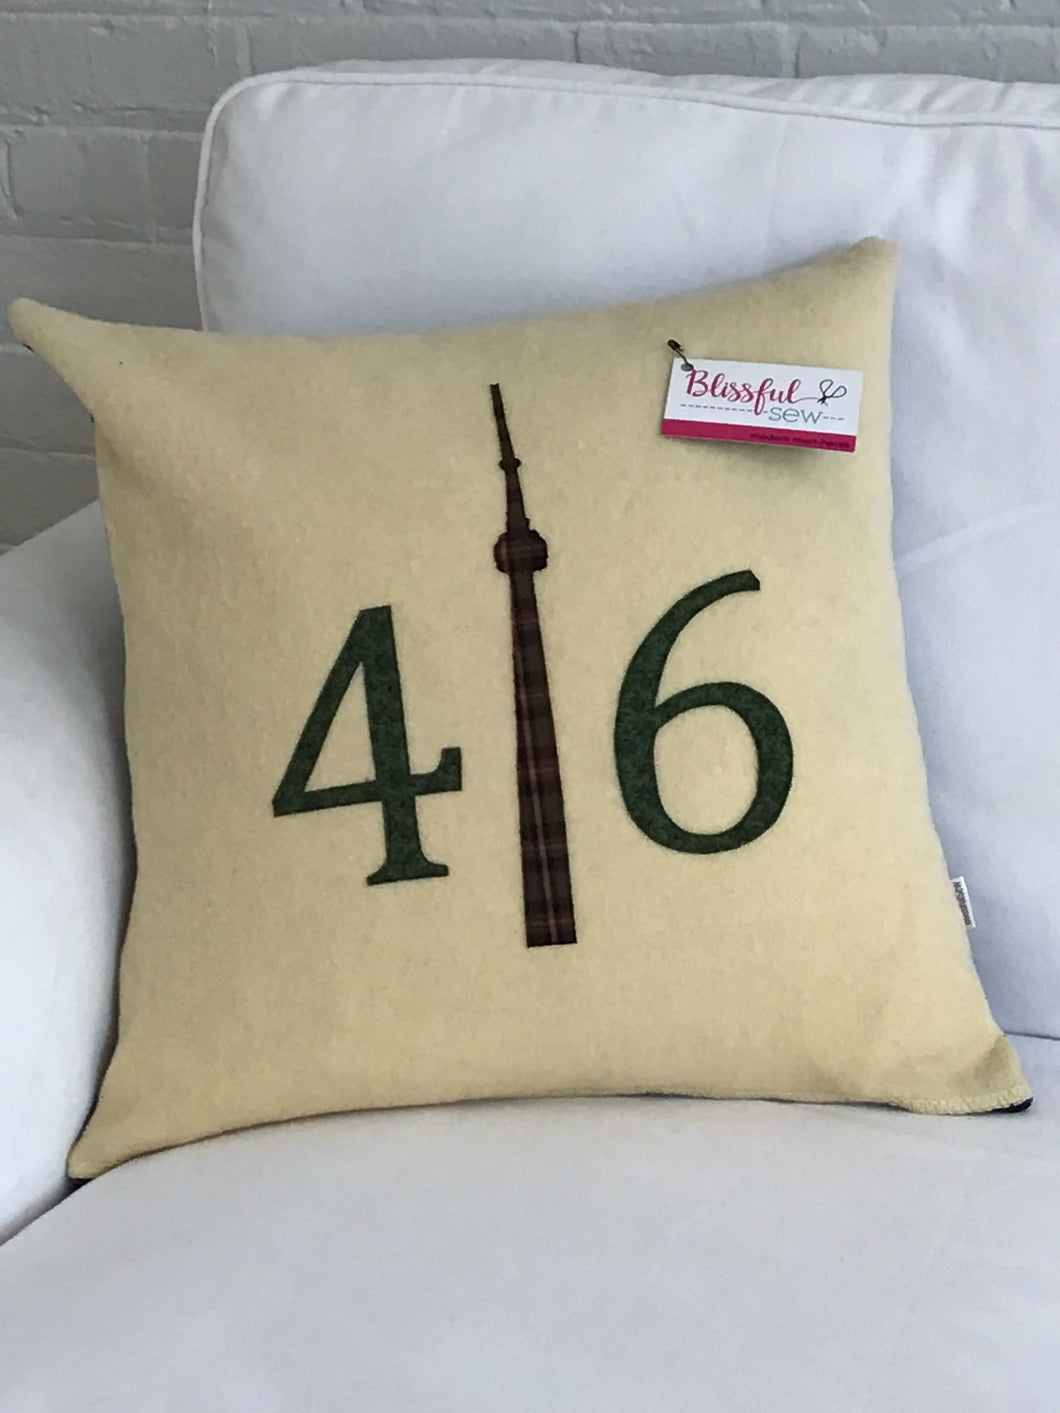 Wool Blanket Pillow - Cream colored background with moss green numbers and green/brown plaid CN Tower.